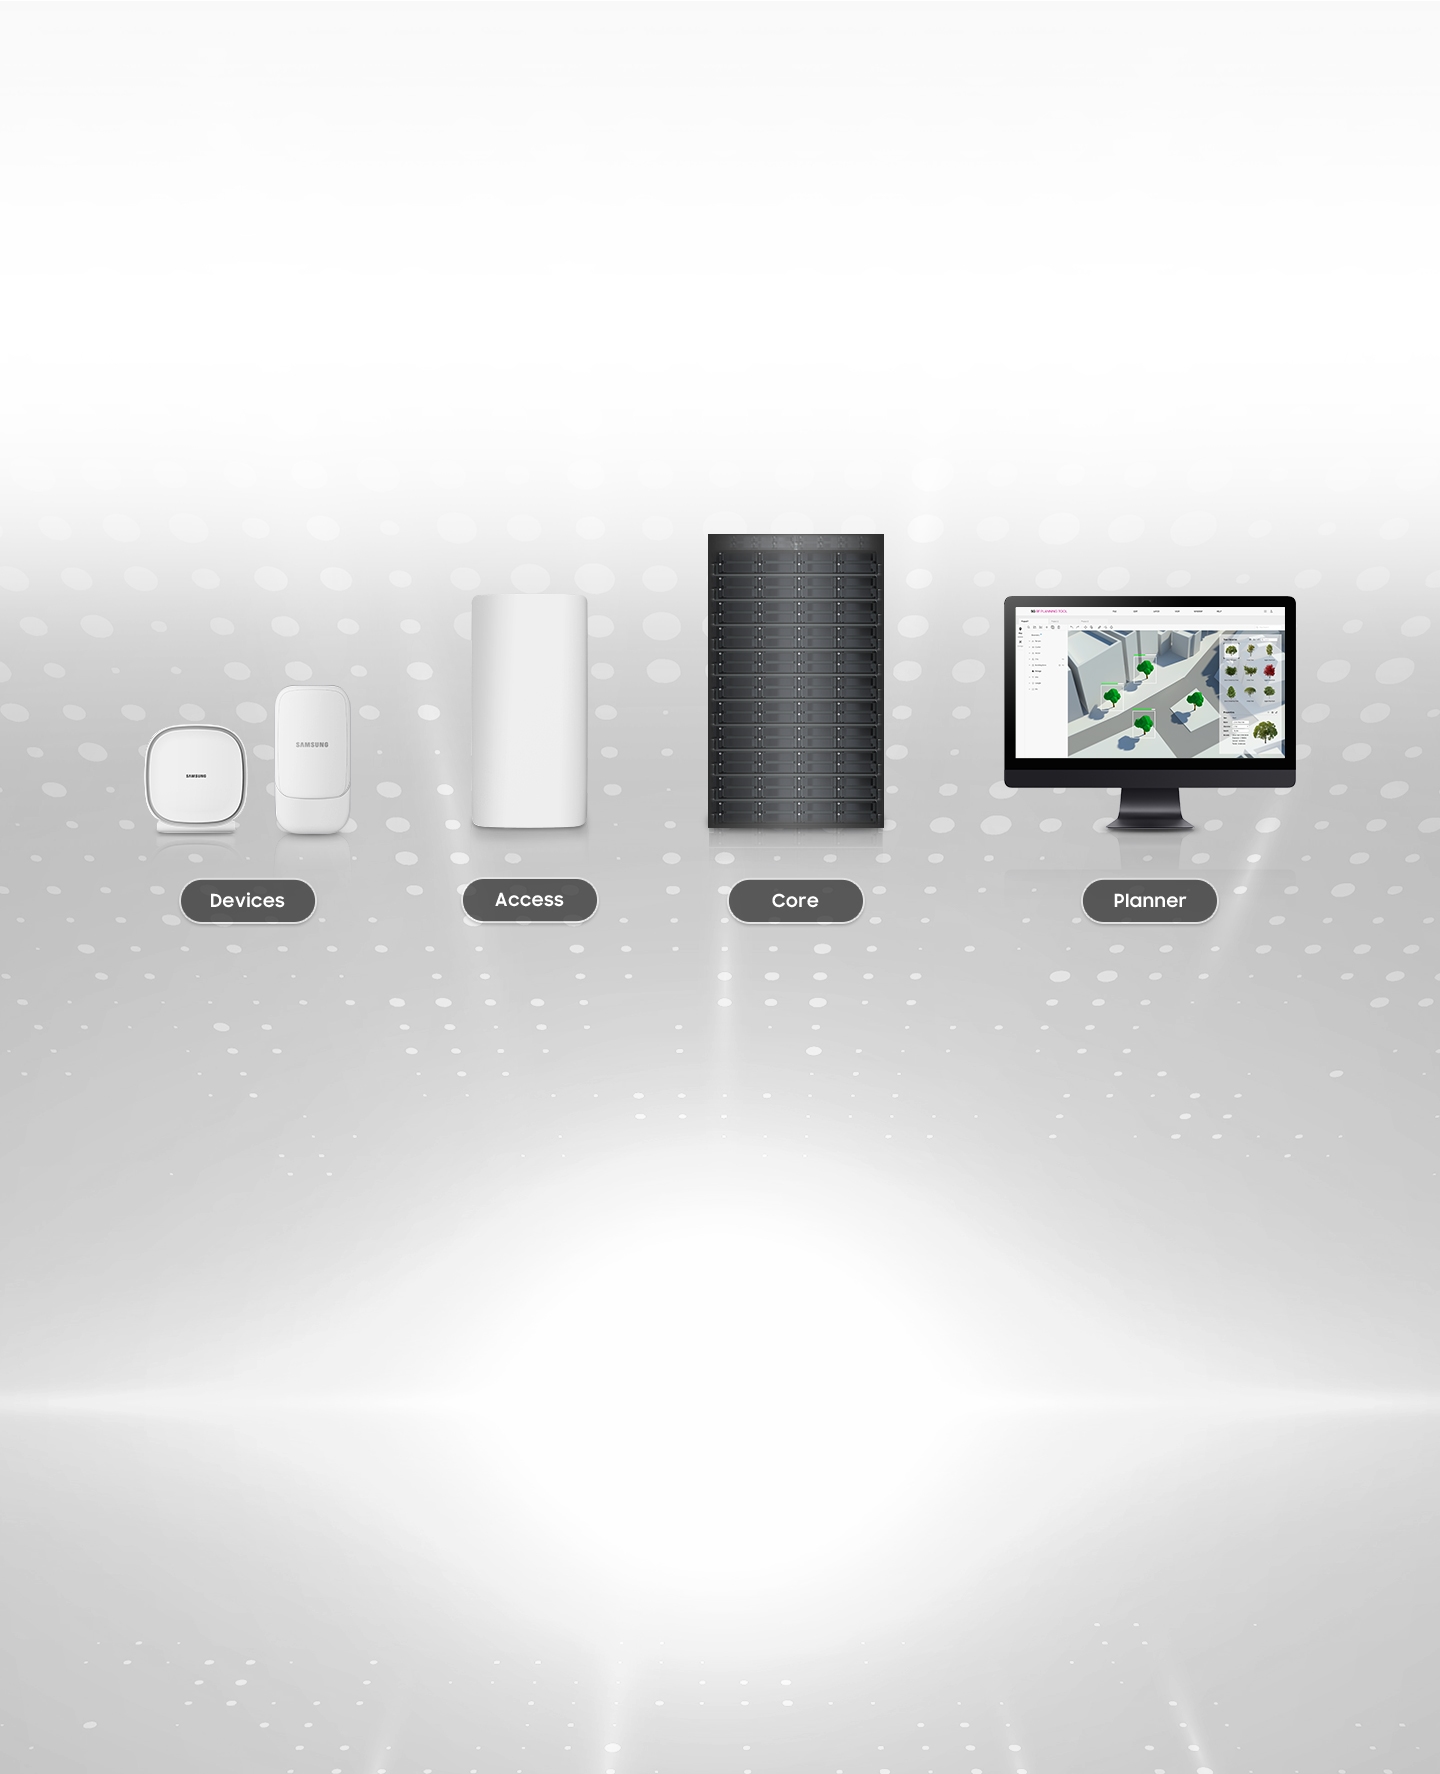 An illustrative image of Samsung's complete end-to-end solutions for fixed wireless access, including CPEs, Access Units, 5G Core, and Radio and Service Planner.